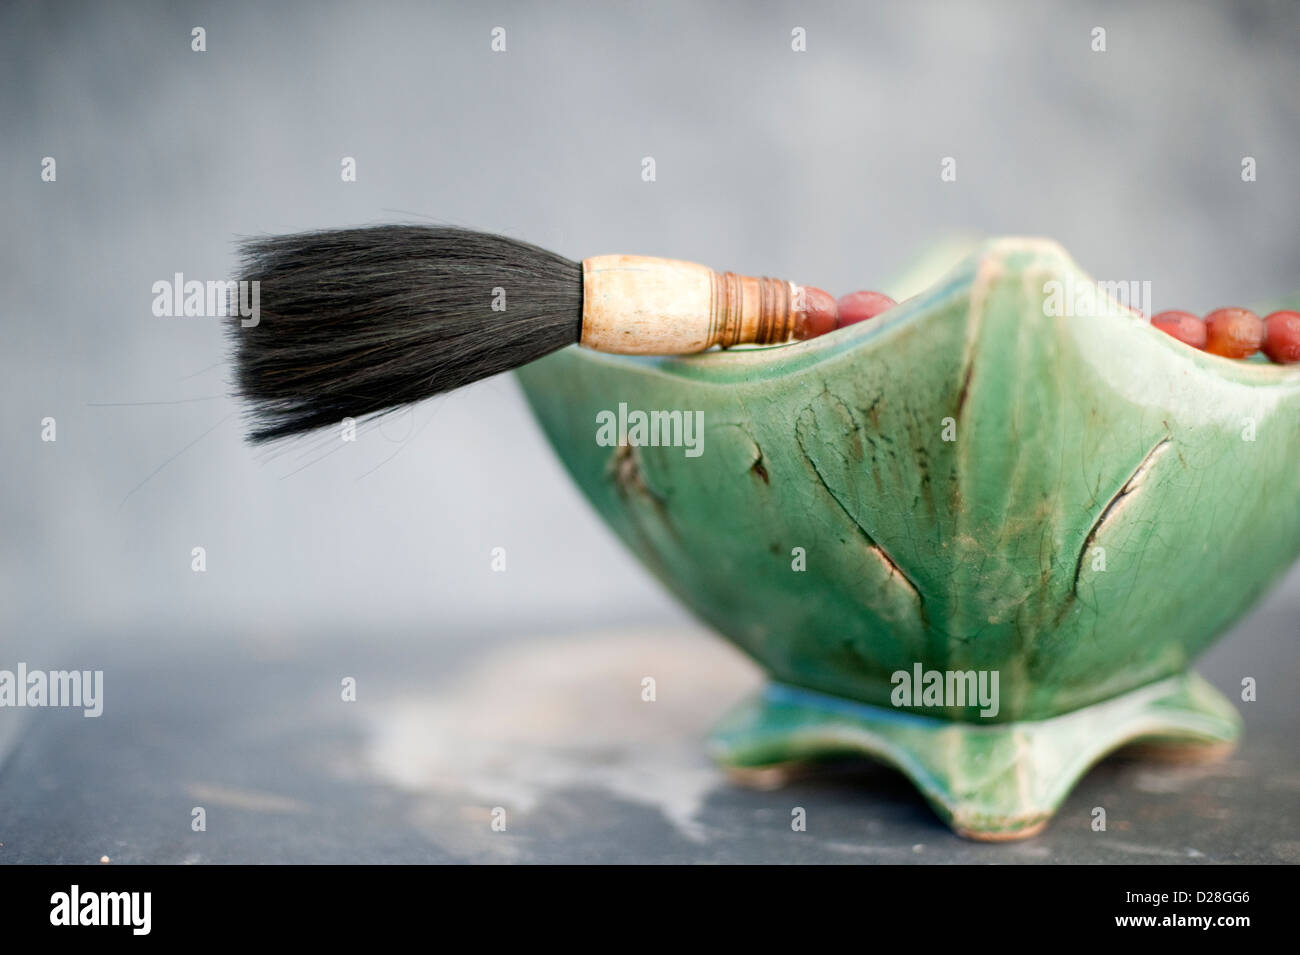 Still life of a traditional Chinese calligraphy brush propped on a bowl of stones. Stock Photo